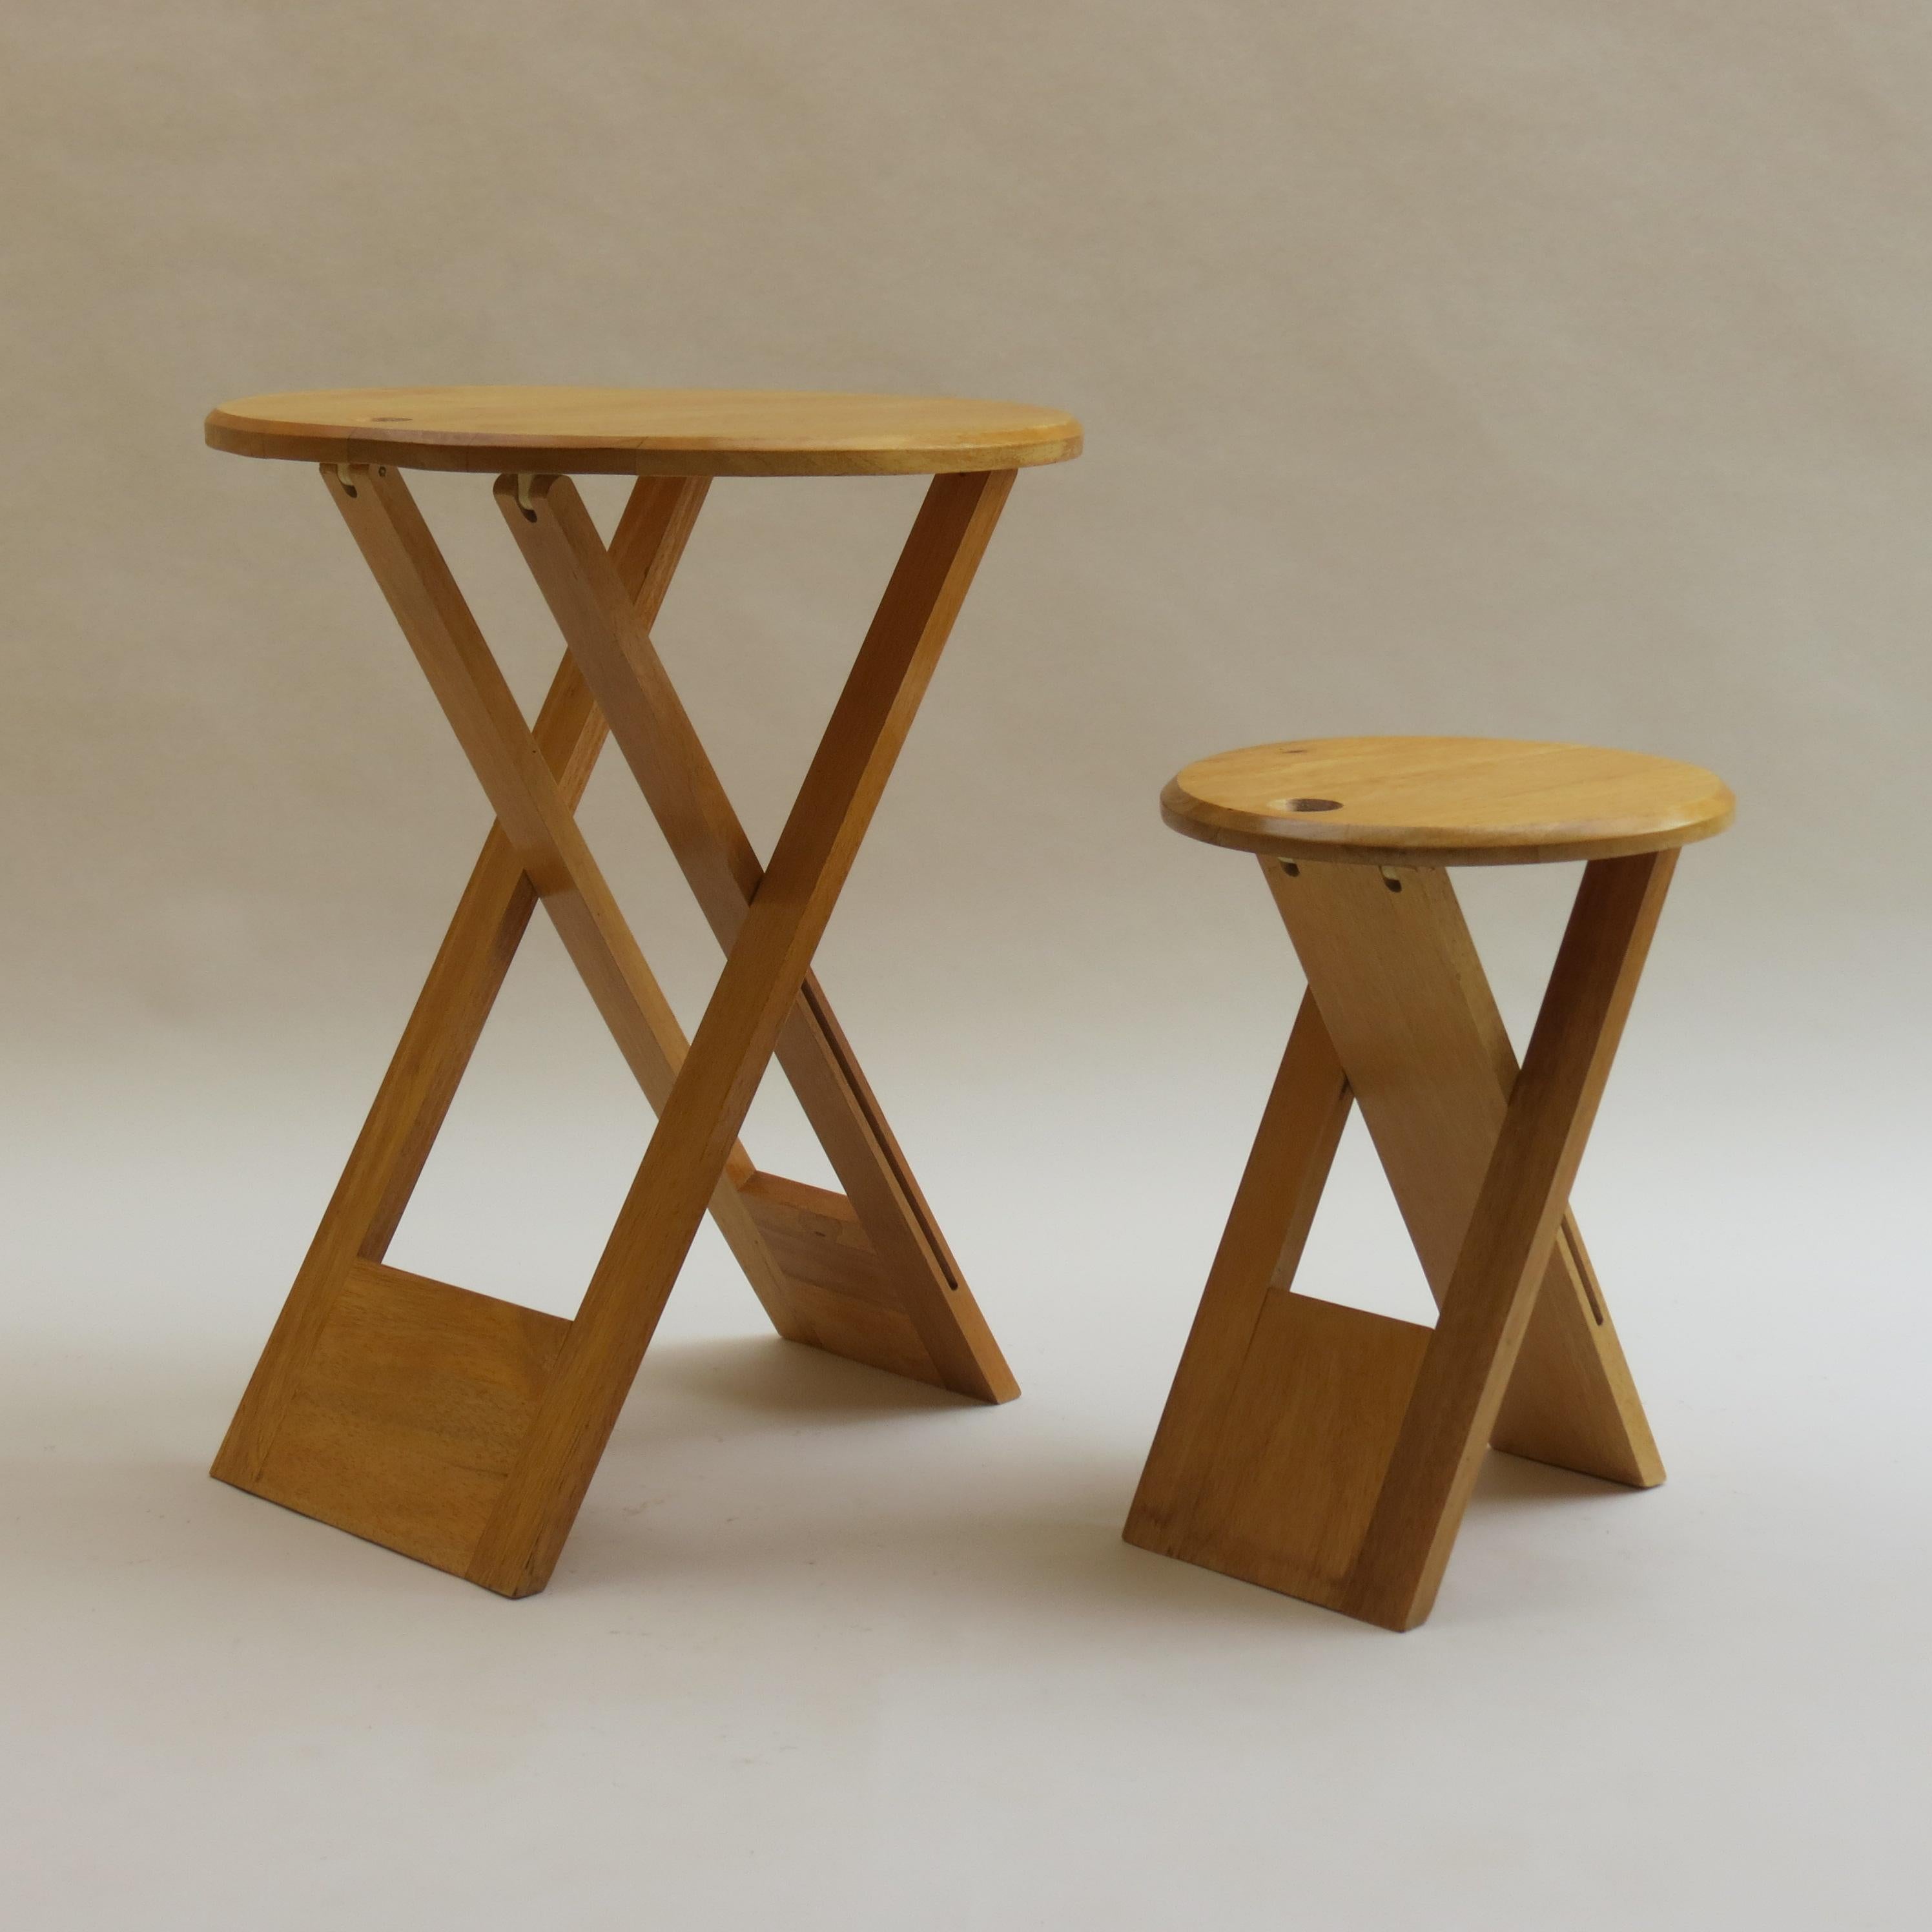 Vintage folding wooden and table in the style of the Suzy stool by Adrian Reed for Princes Design Works.

In good vintage condition, the hinges are all in good condition, with minimal signs of wear over all.
Made from solid beech with plastic